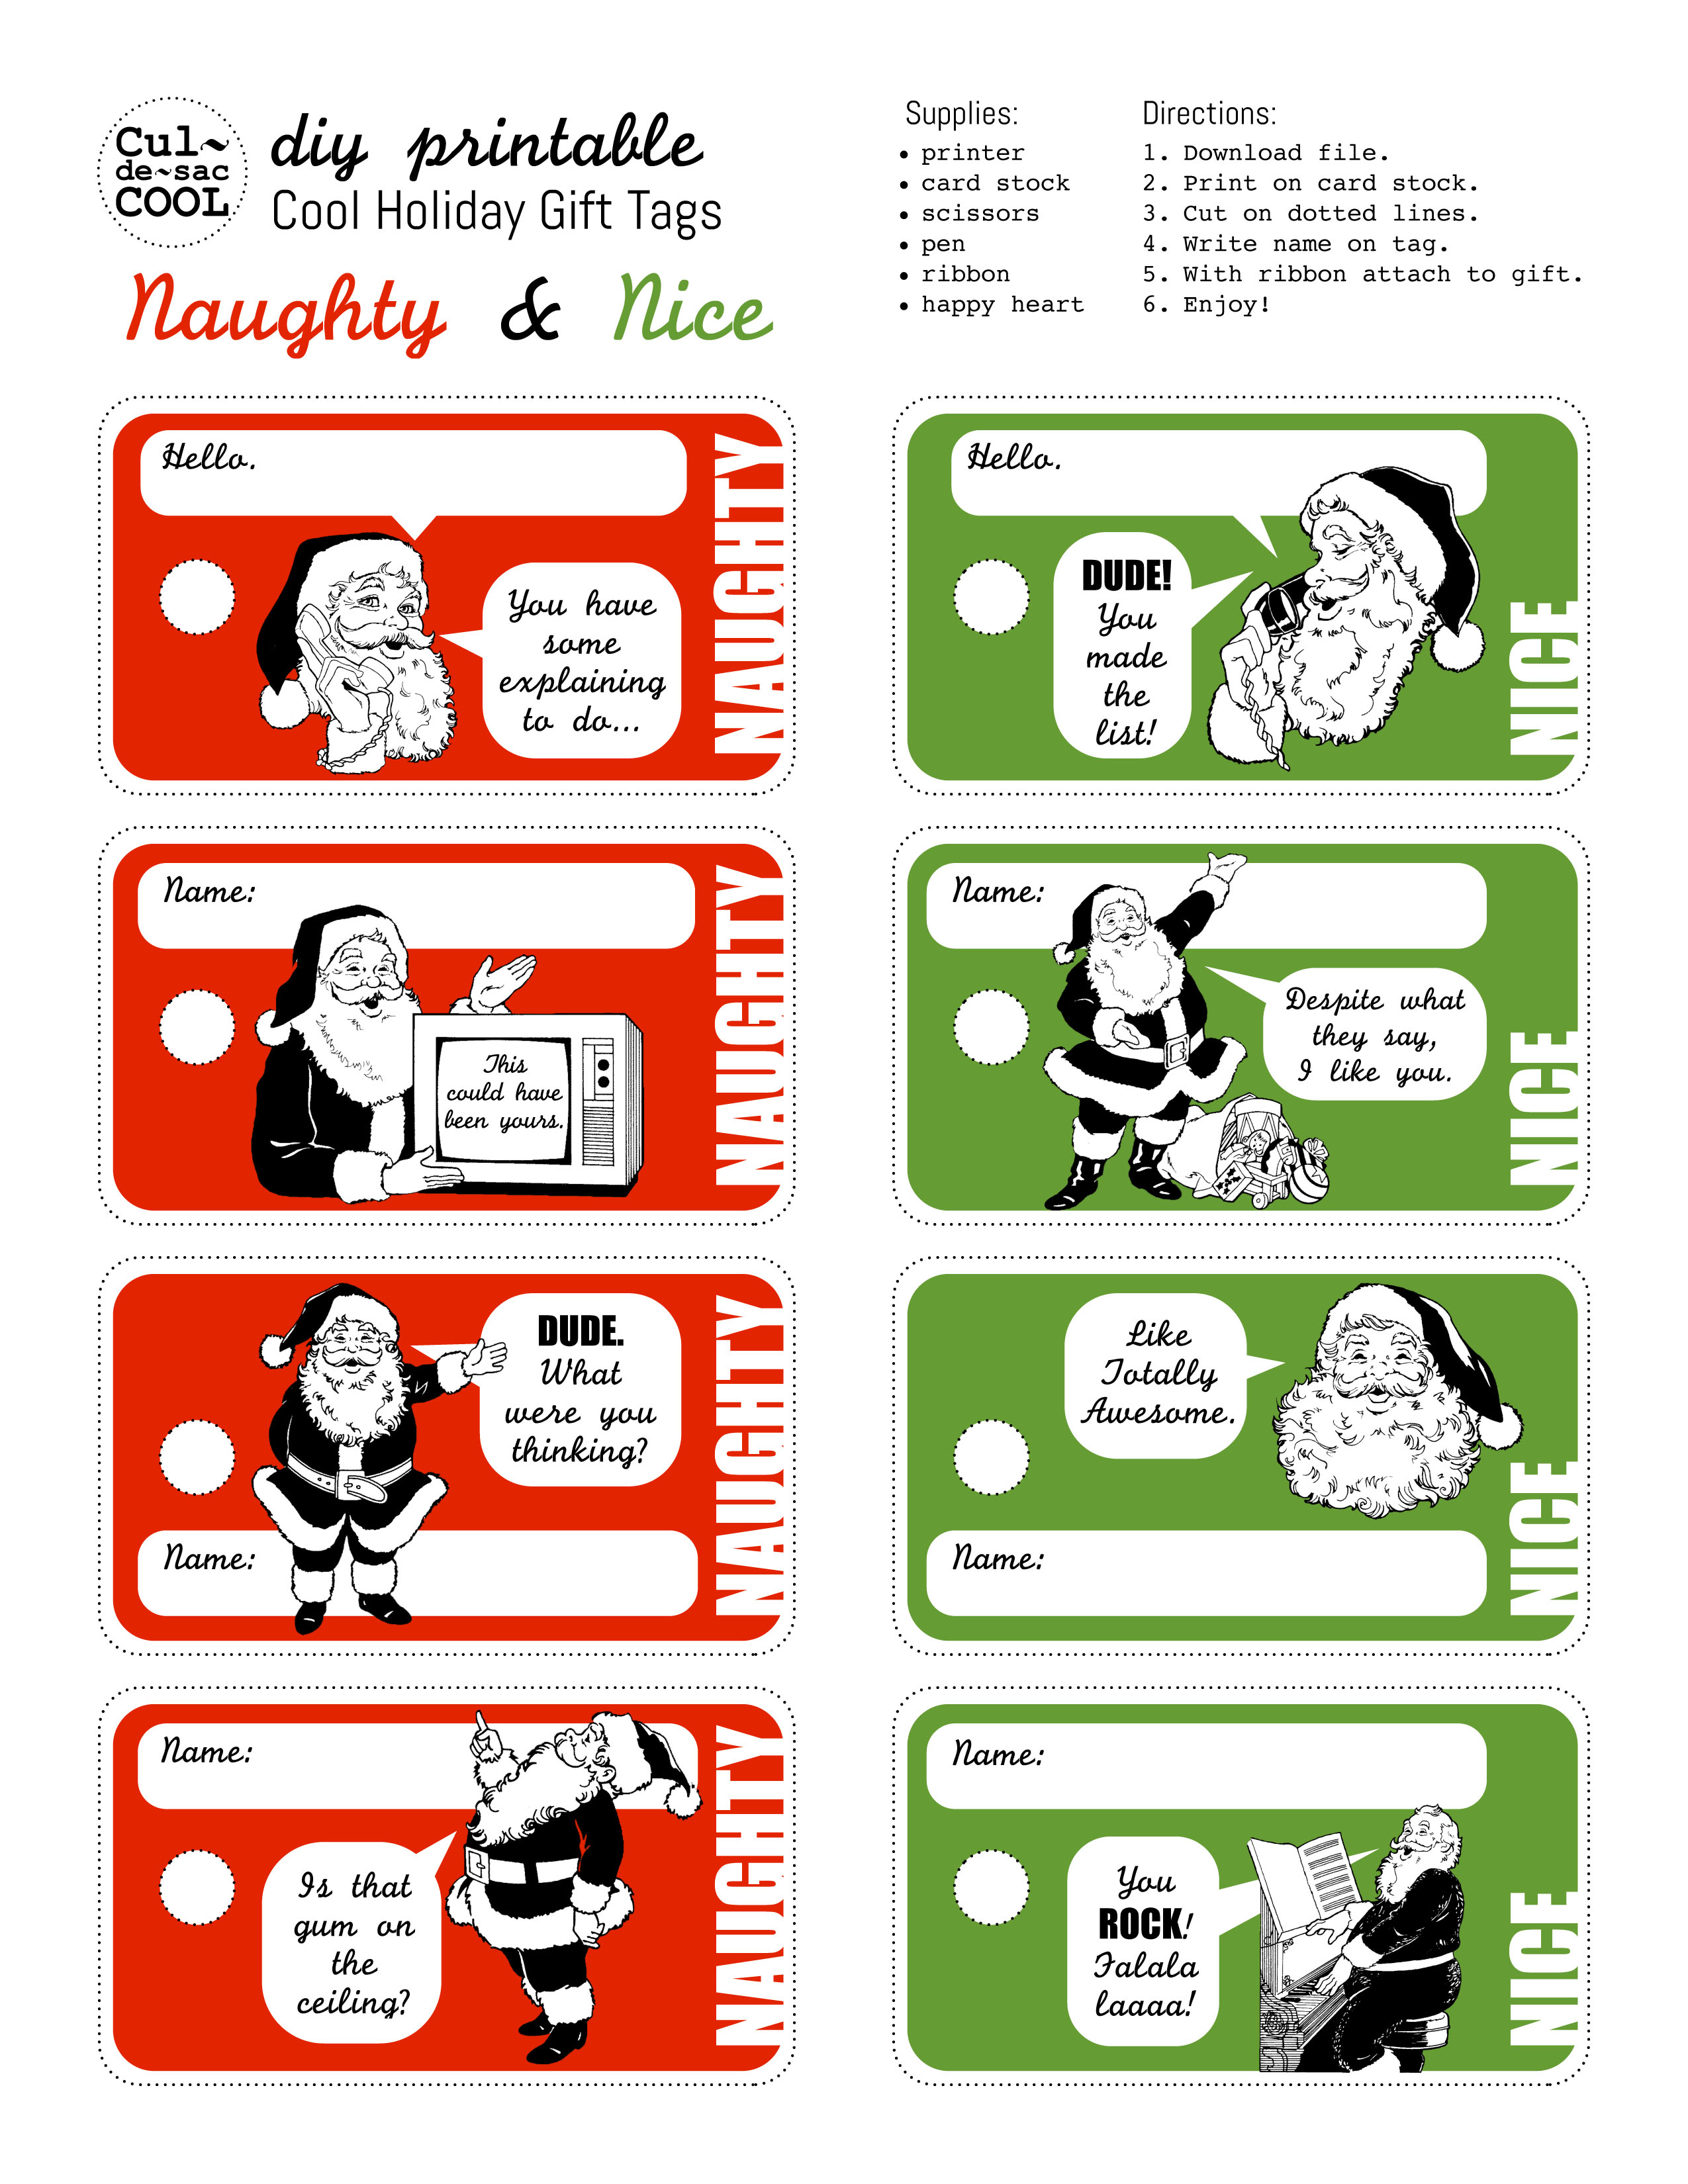 8 Best Images of Funny Christmas Gift Tags Printable - Secret Santa